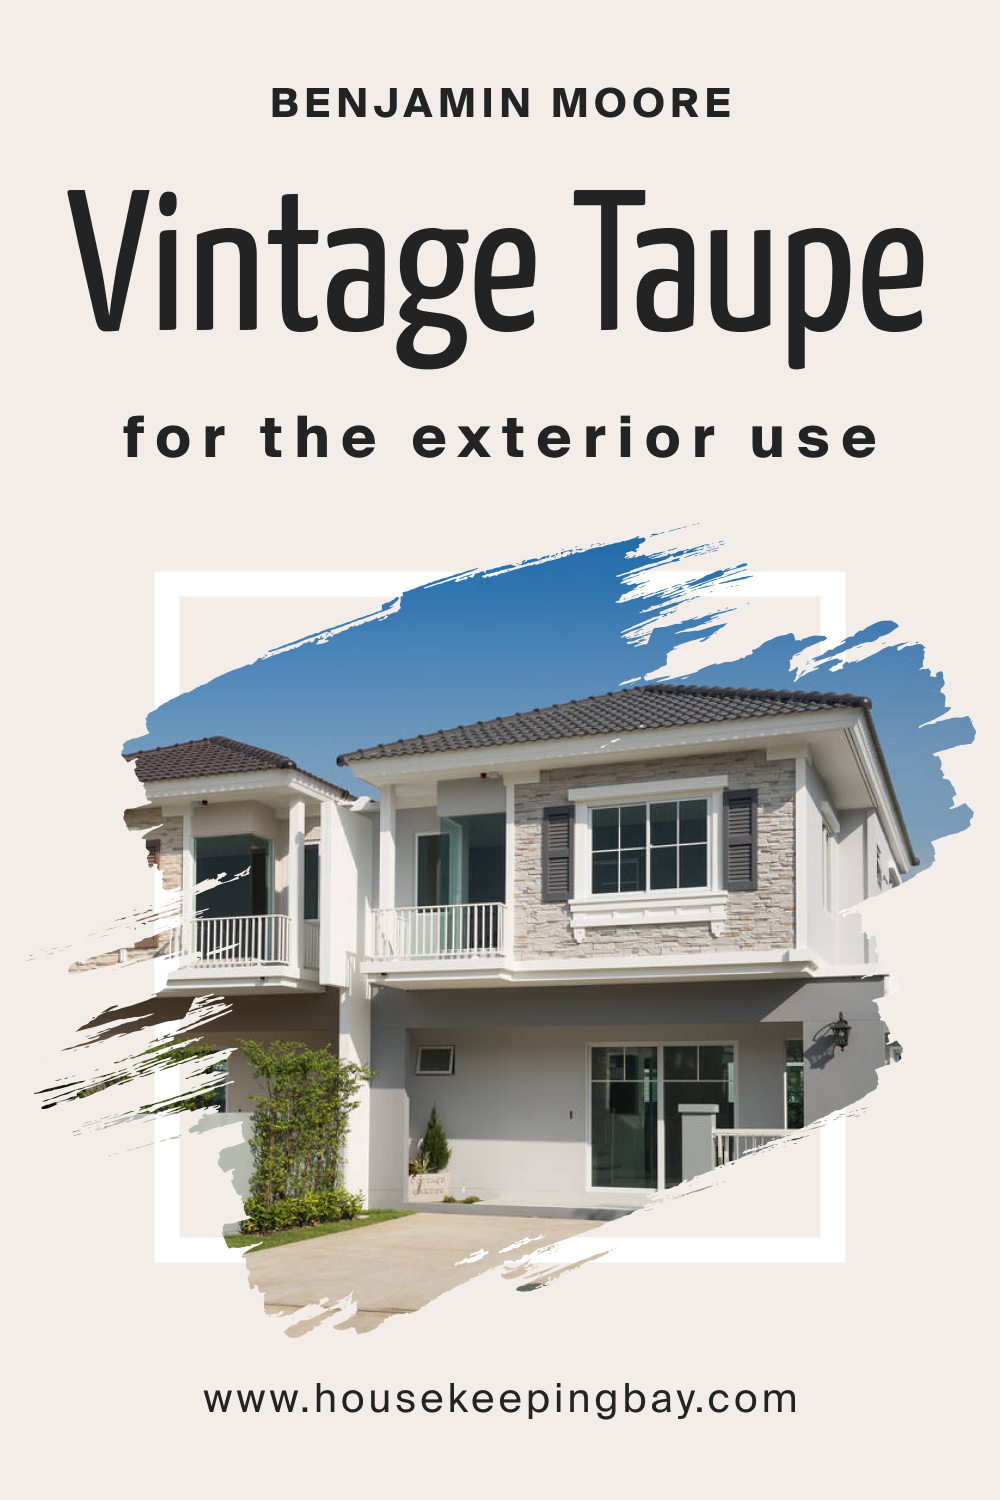 Benjamin Moore. Vintage Taupe 2110 70 for the Exterior Use